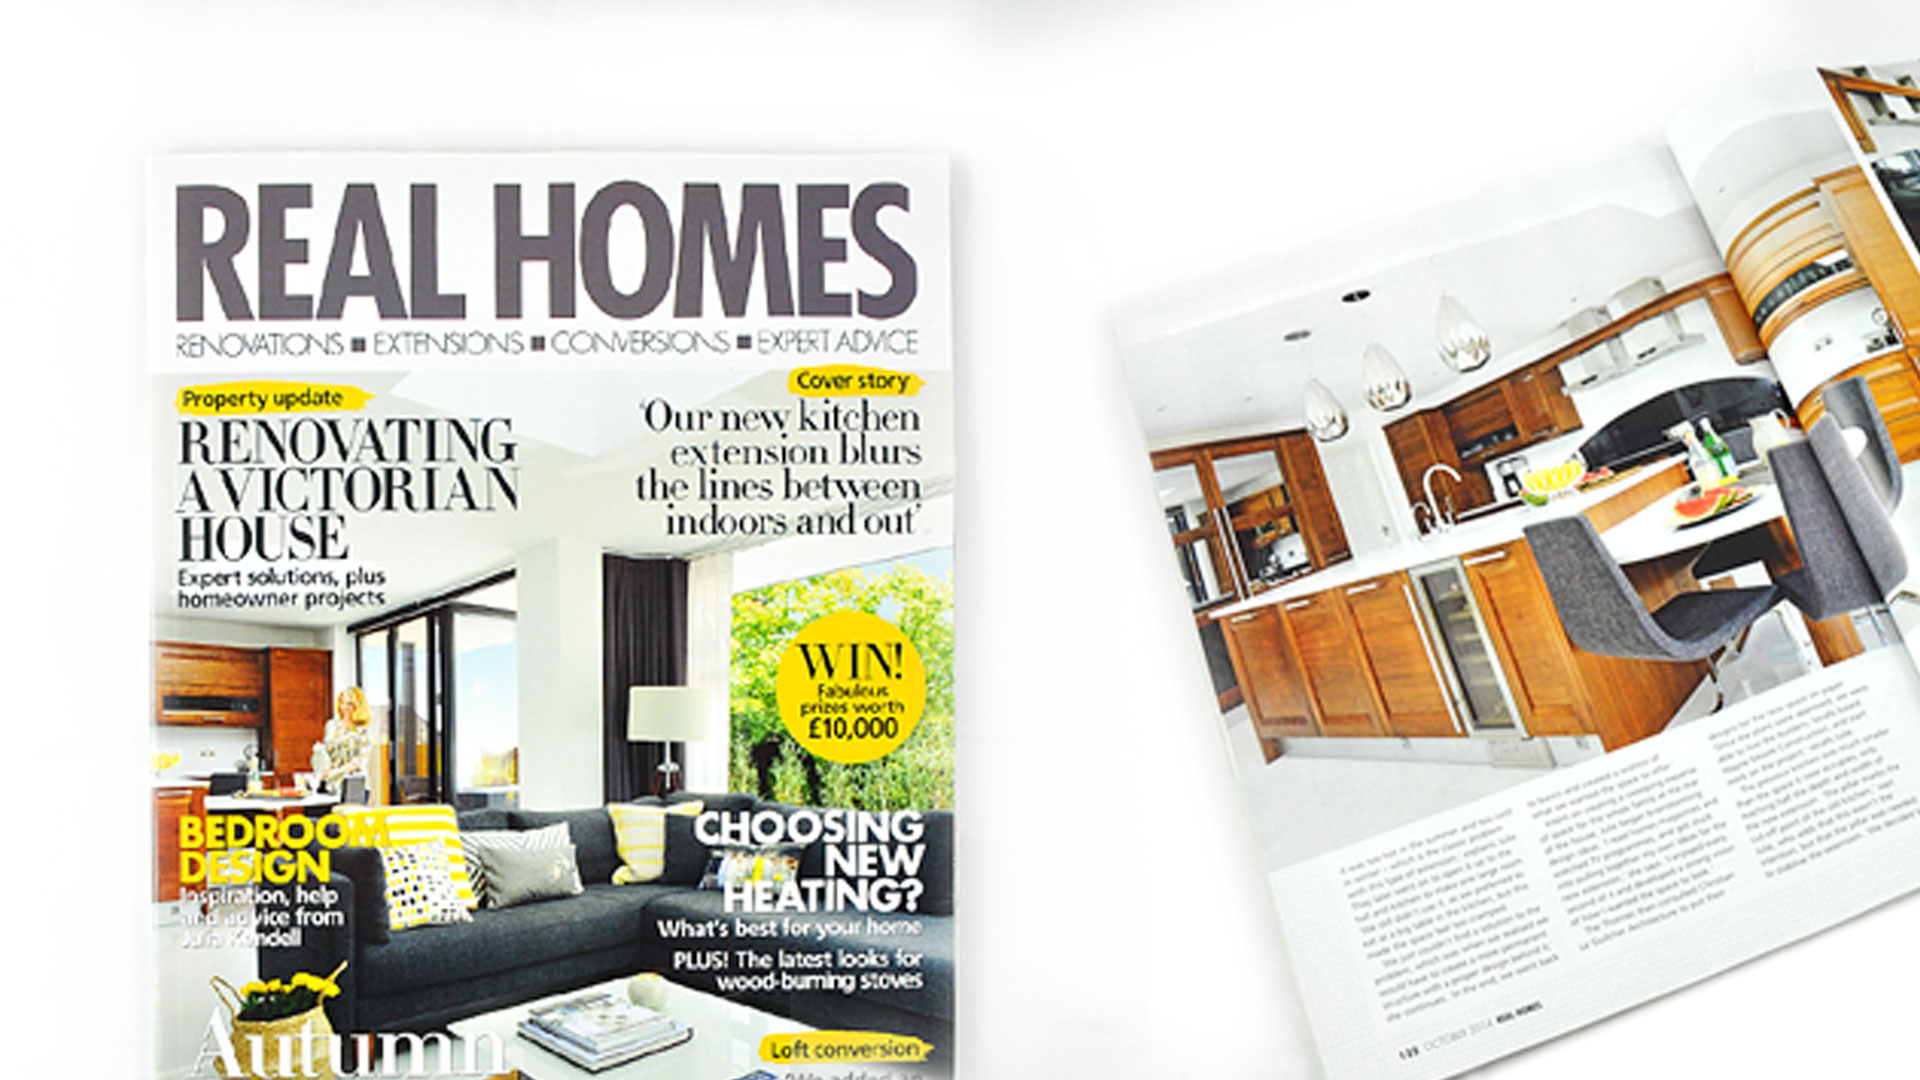 Real Homes Magazine Feature October 2014